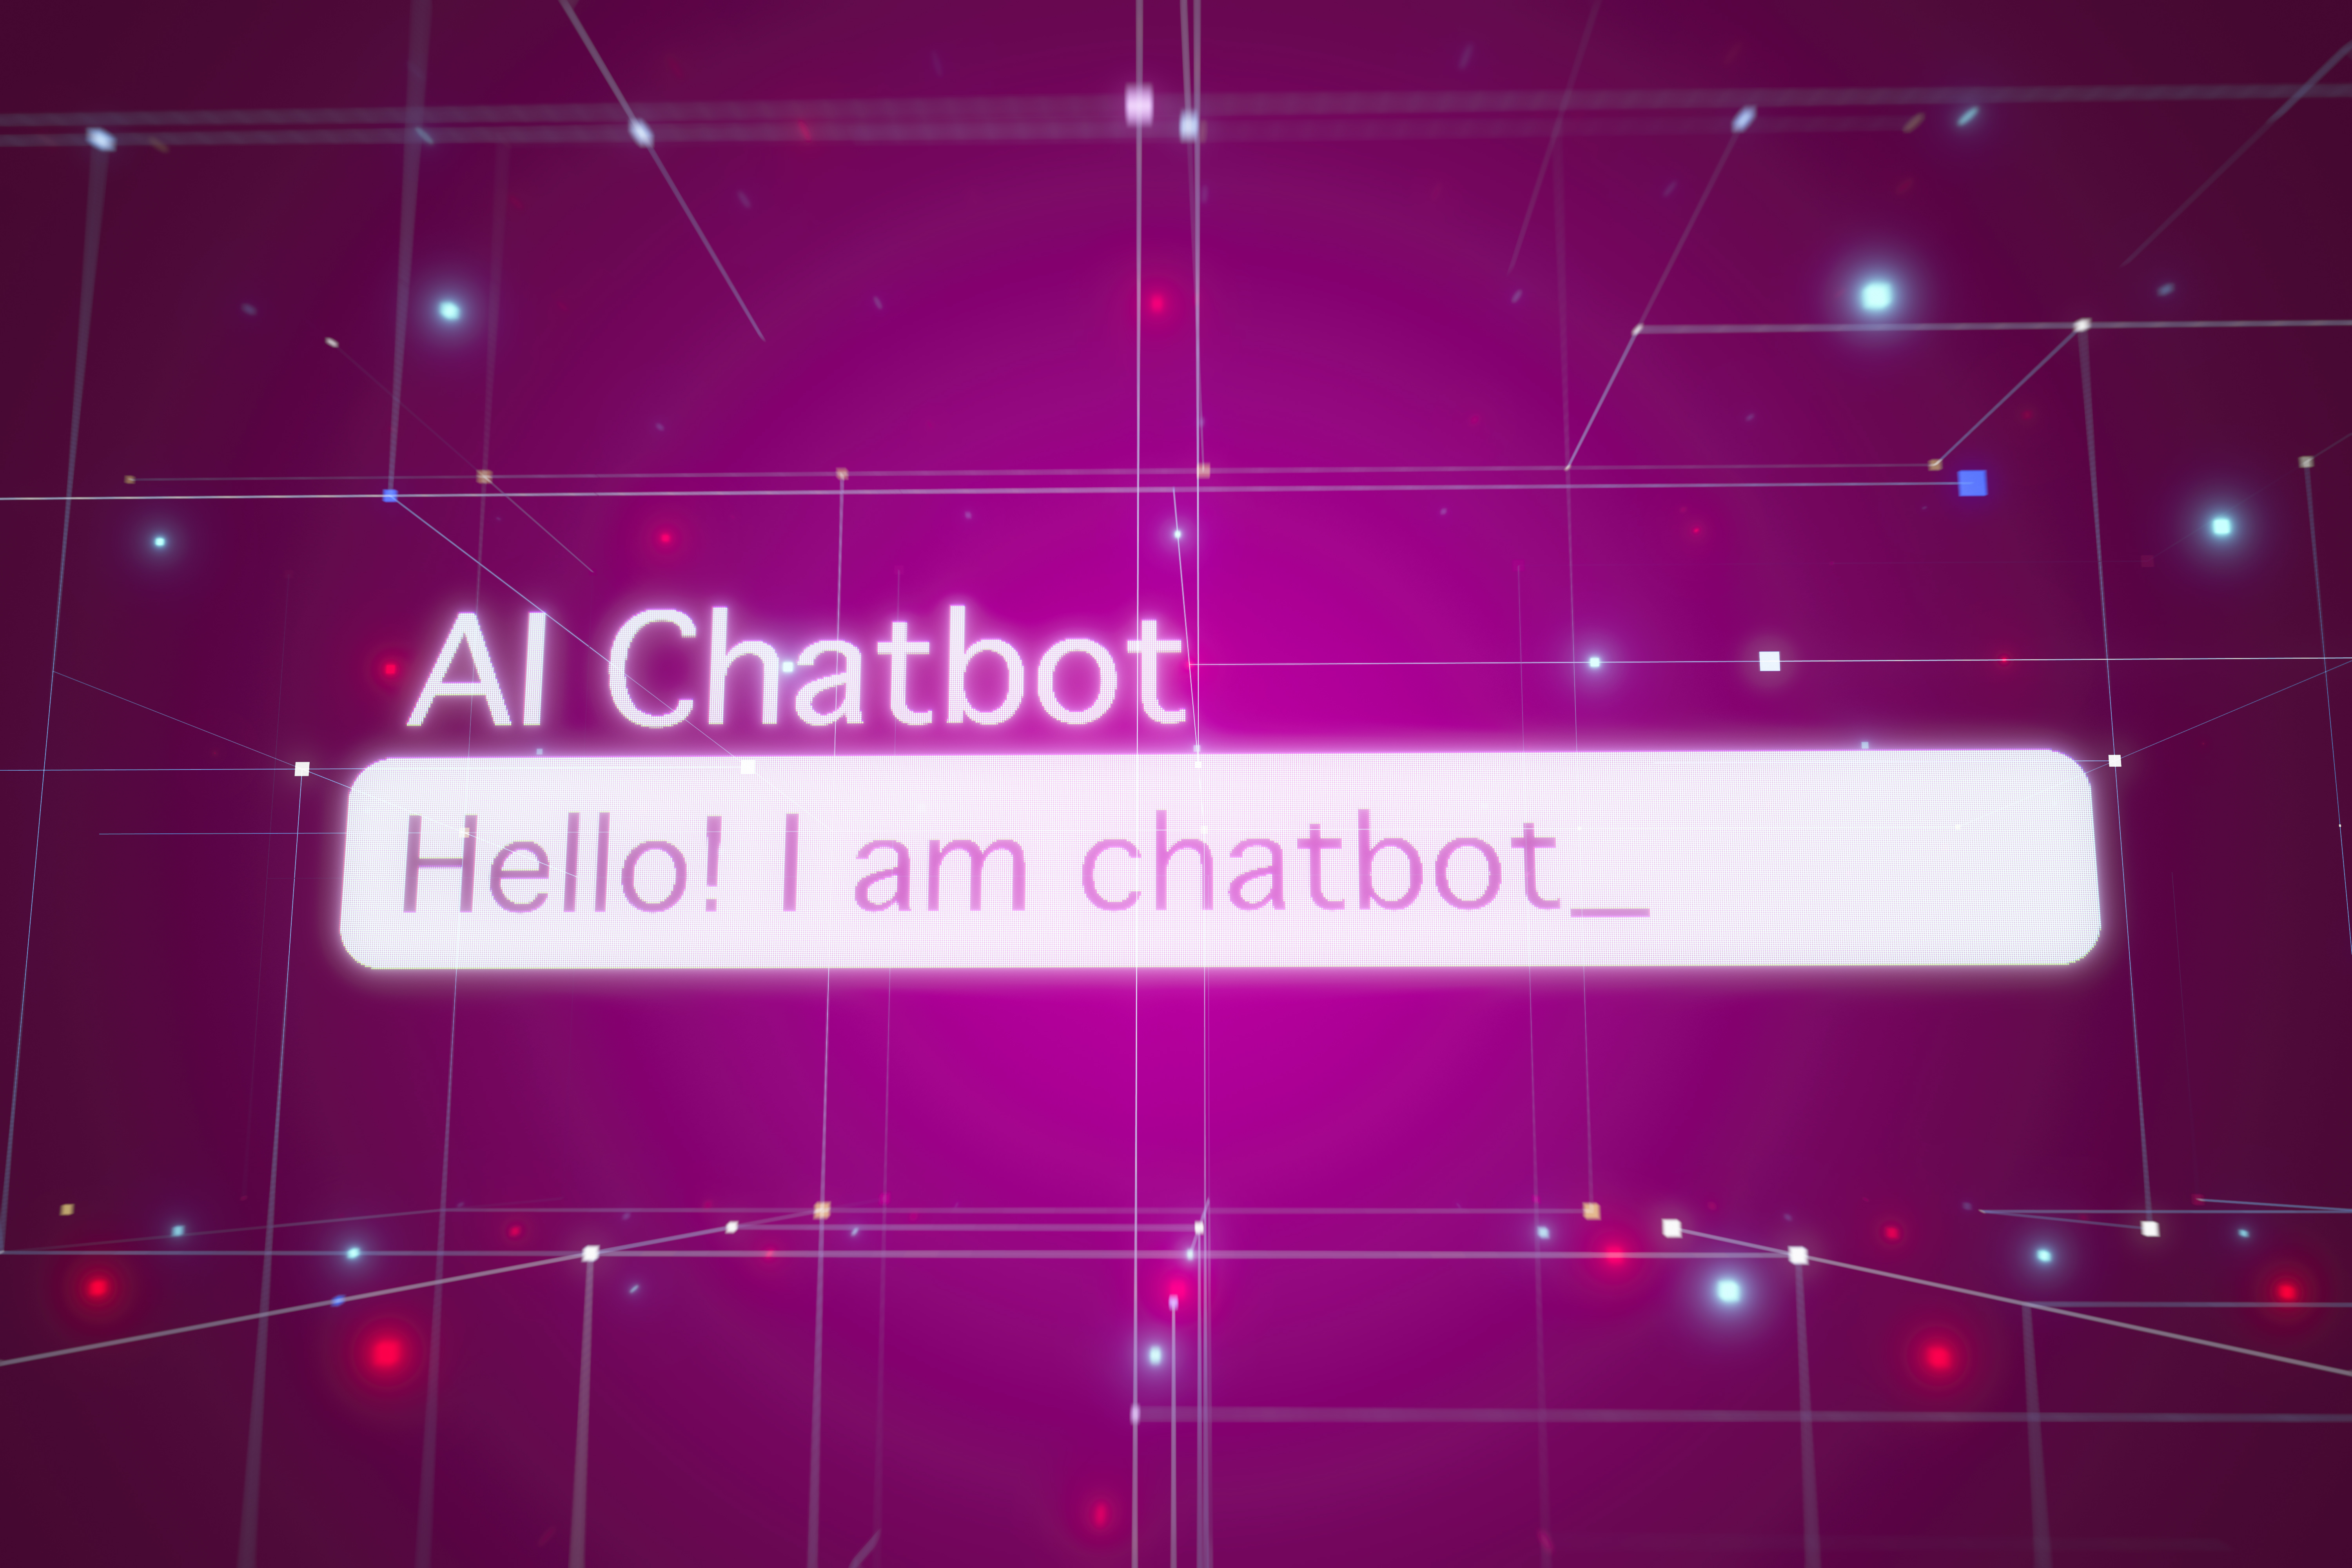 The words AI Chatbot. Hello! I am chatbot appear on a purple screen.